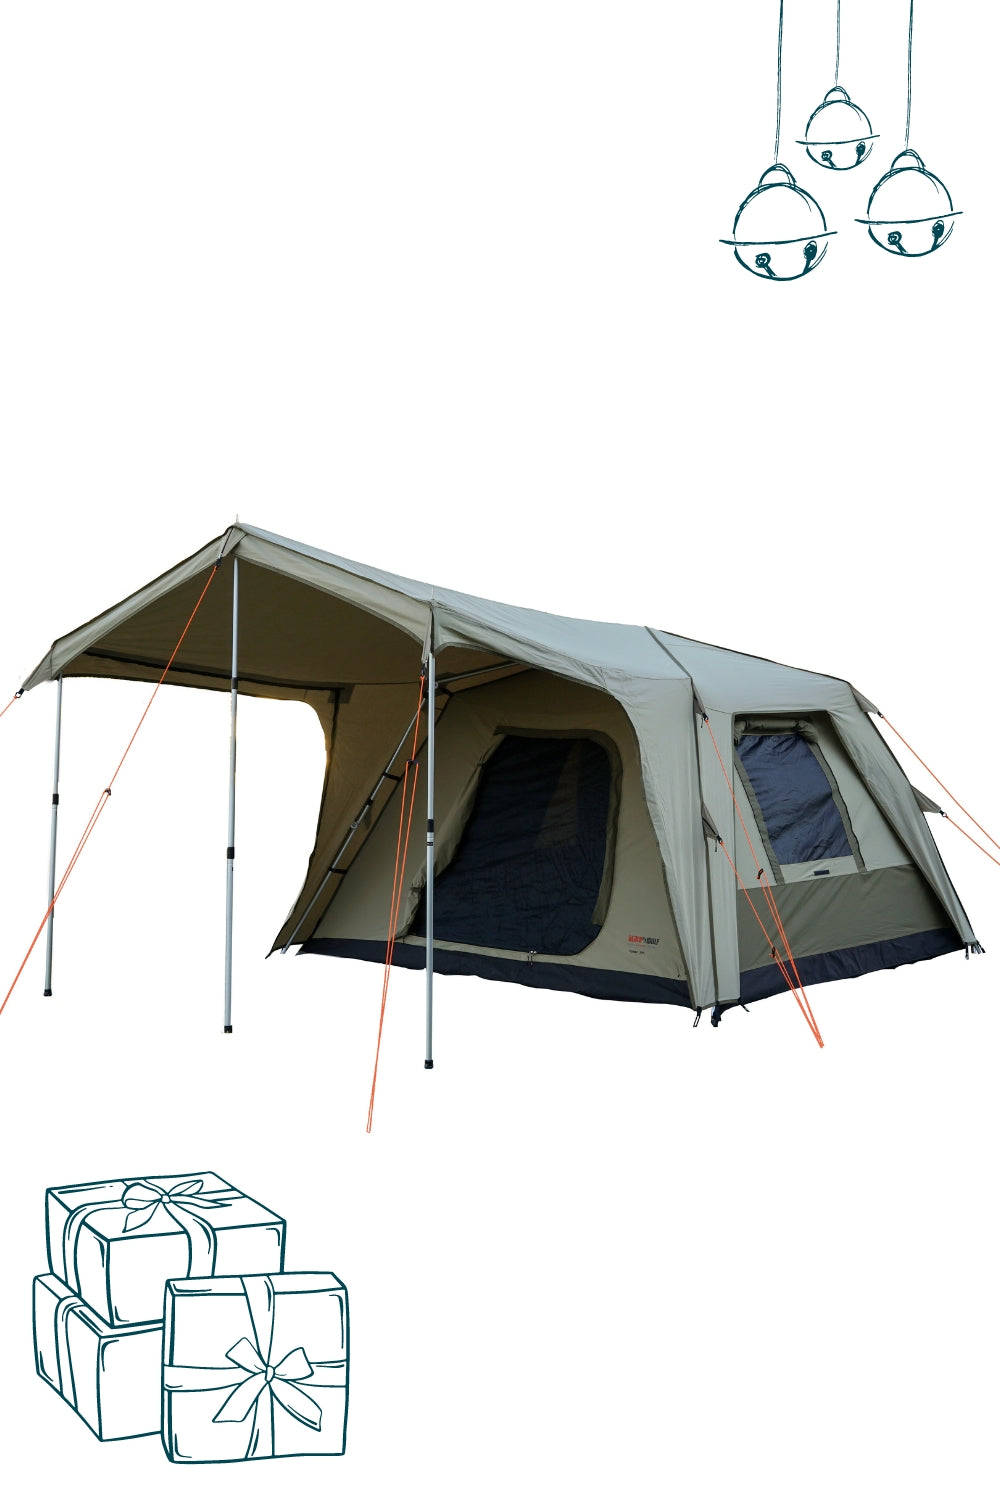 Day Two: Turbo 240 Lite Tent